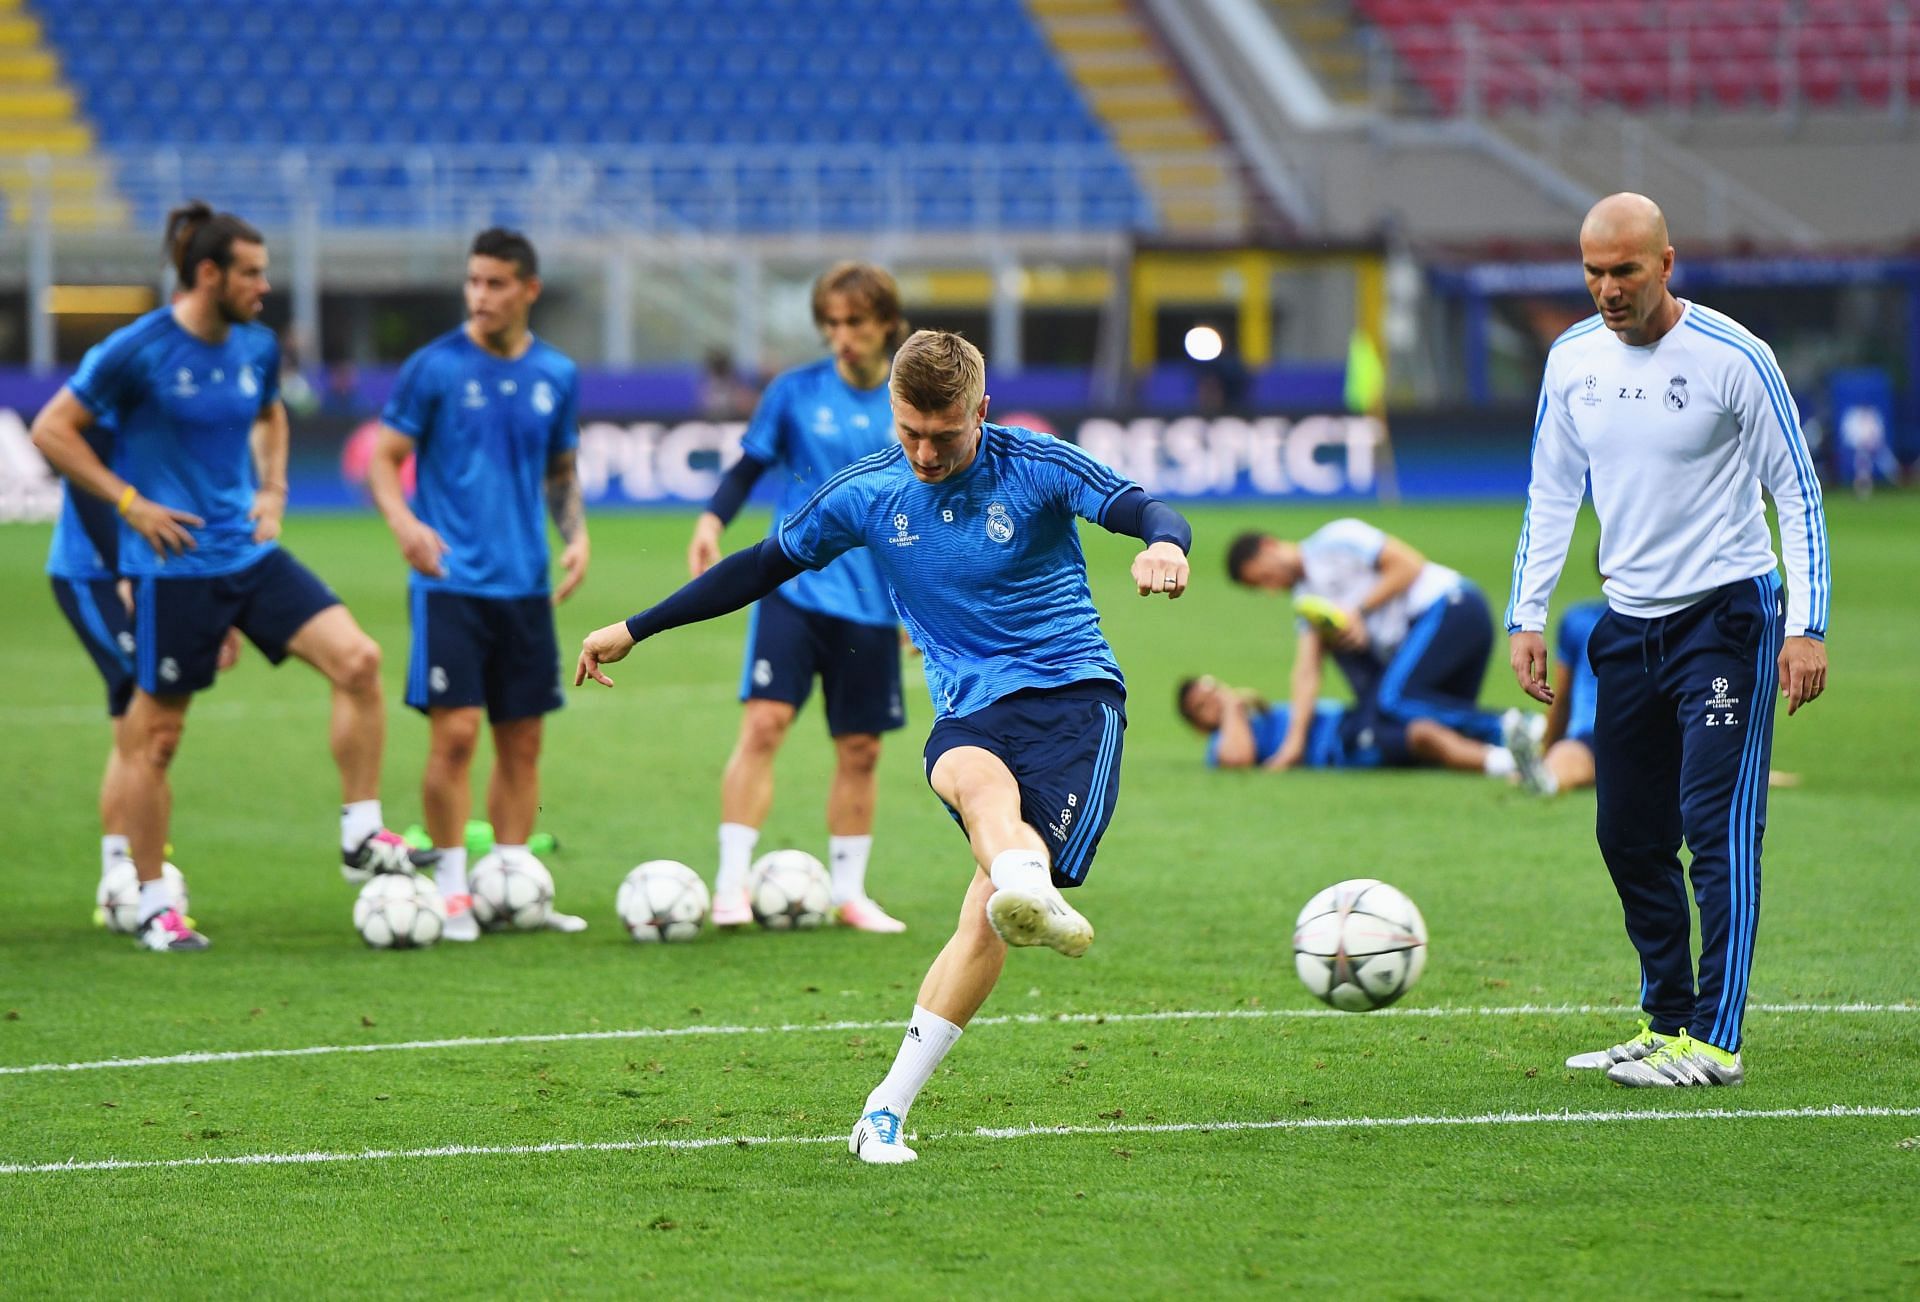 Toni Kroos warms up before a Champions League game.